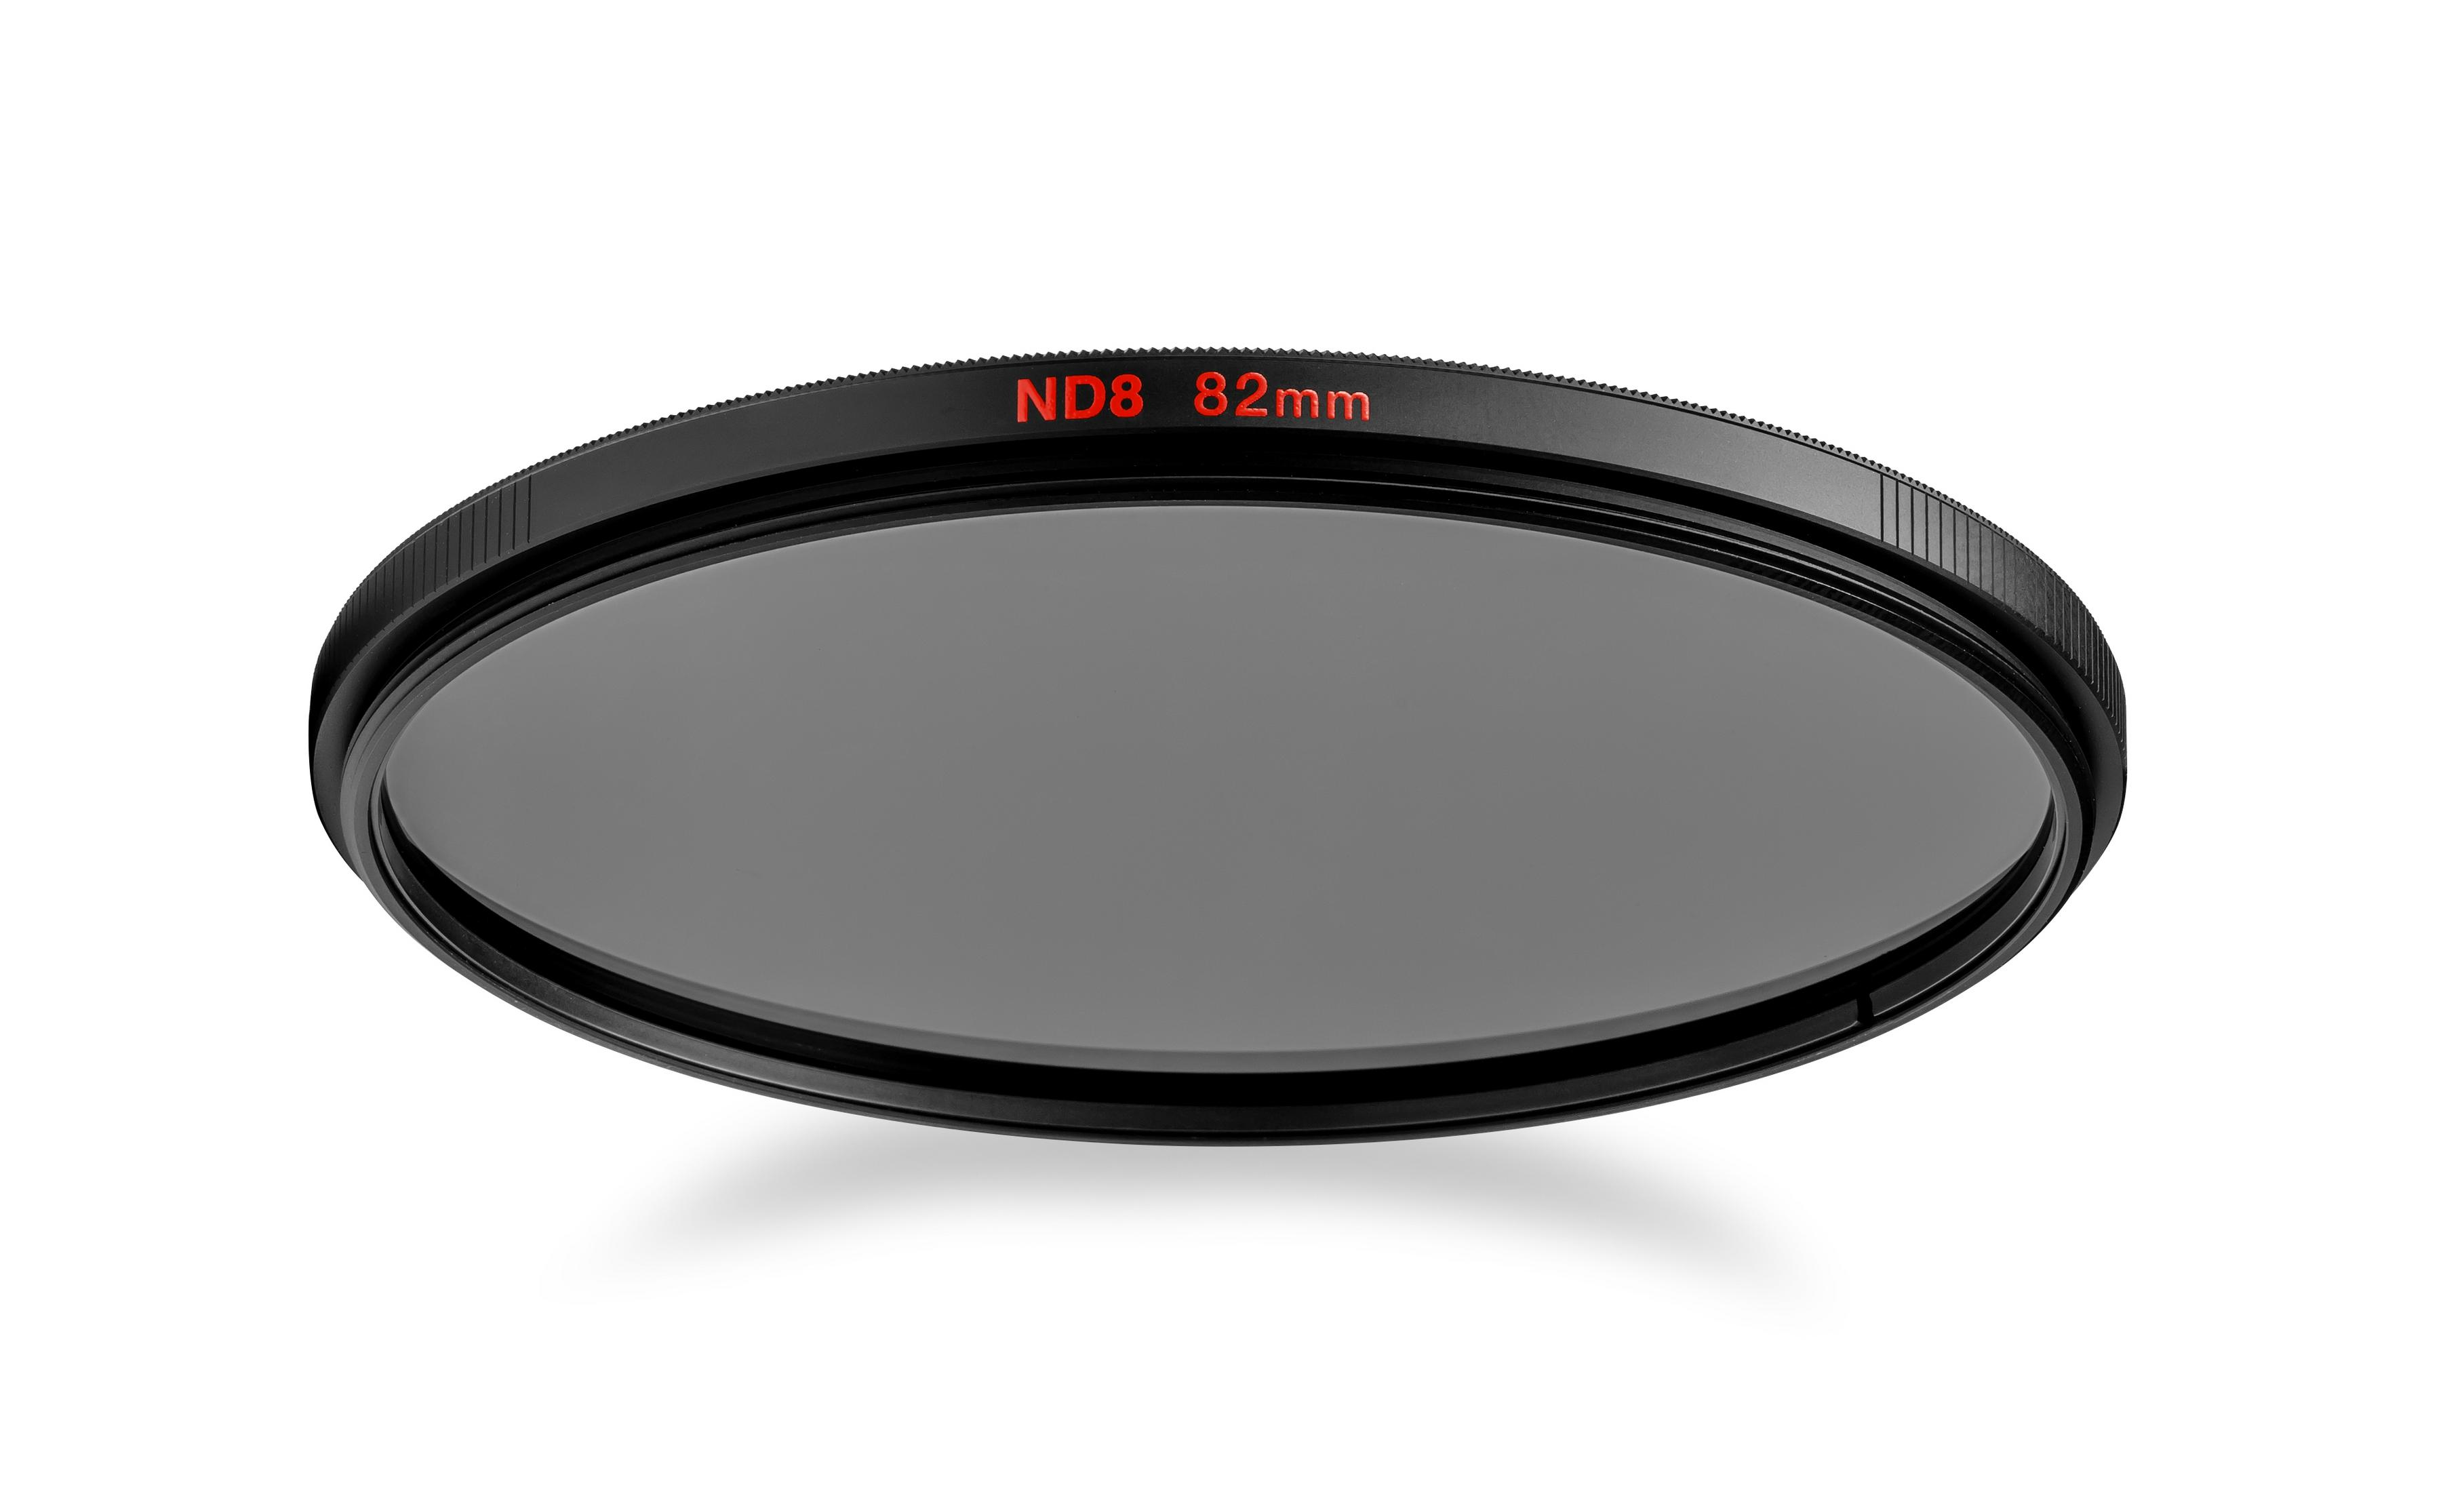 MANFROTTO MFND8-55 RUNDFILTER 55 Pol-Filter mm 55MM